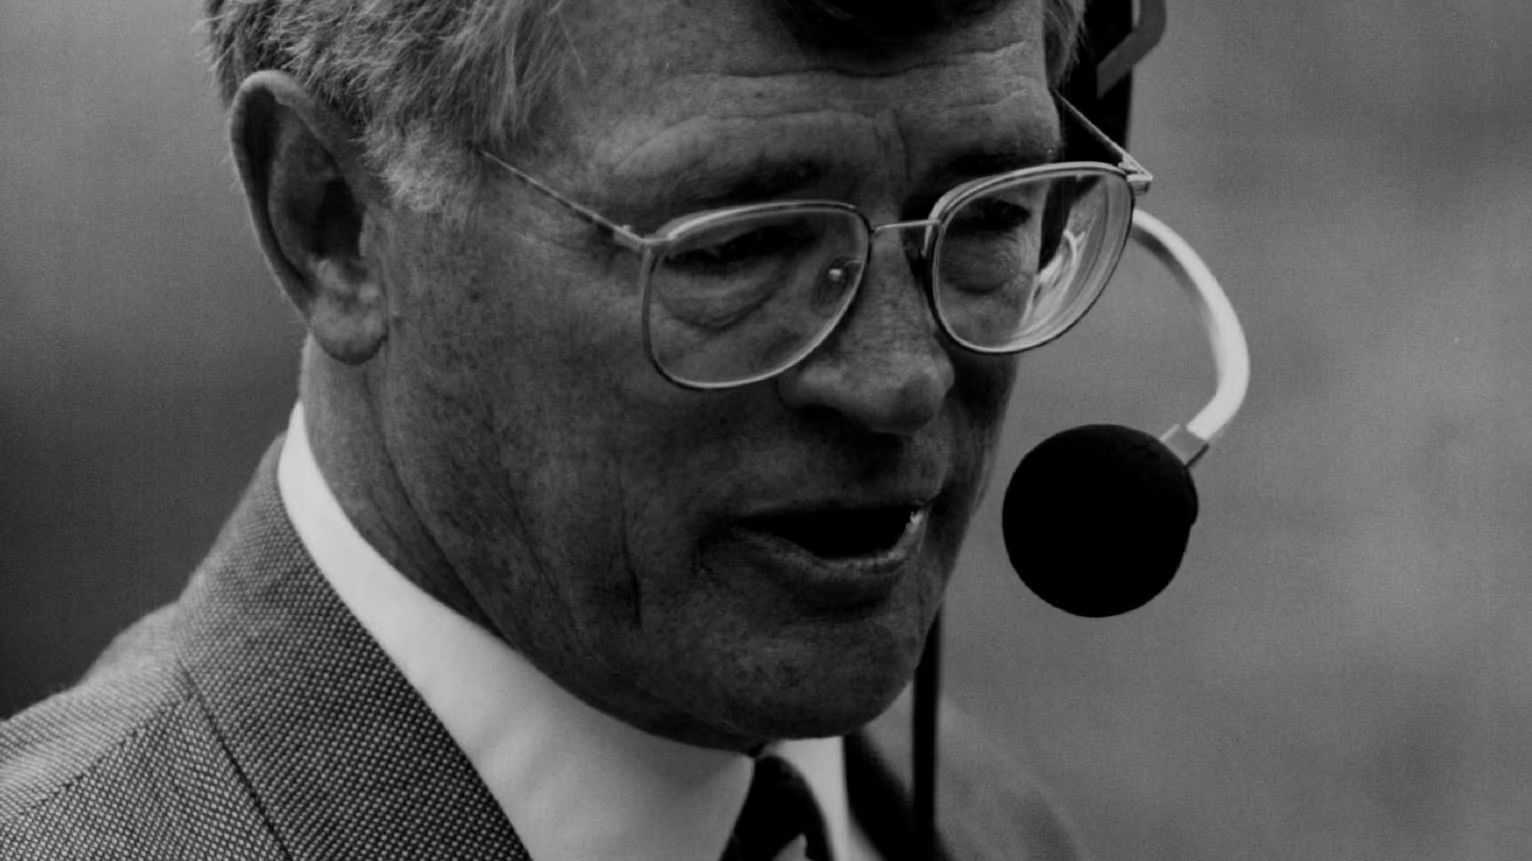 Dan Reeves, former NFL coach and player,  dies at 77